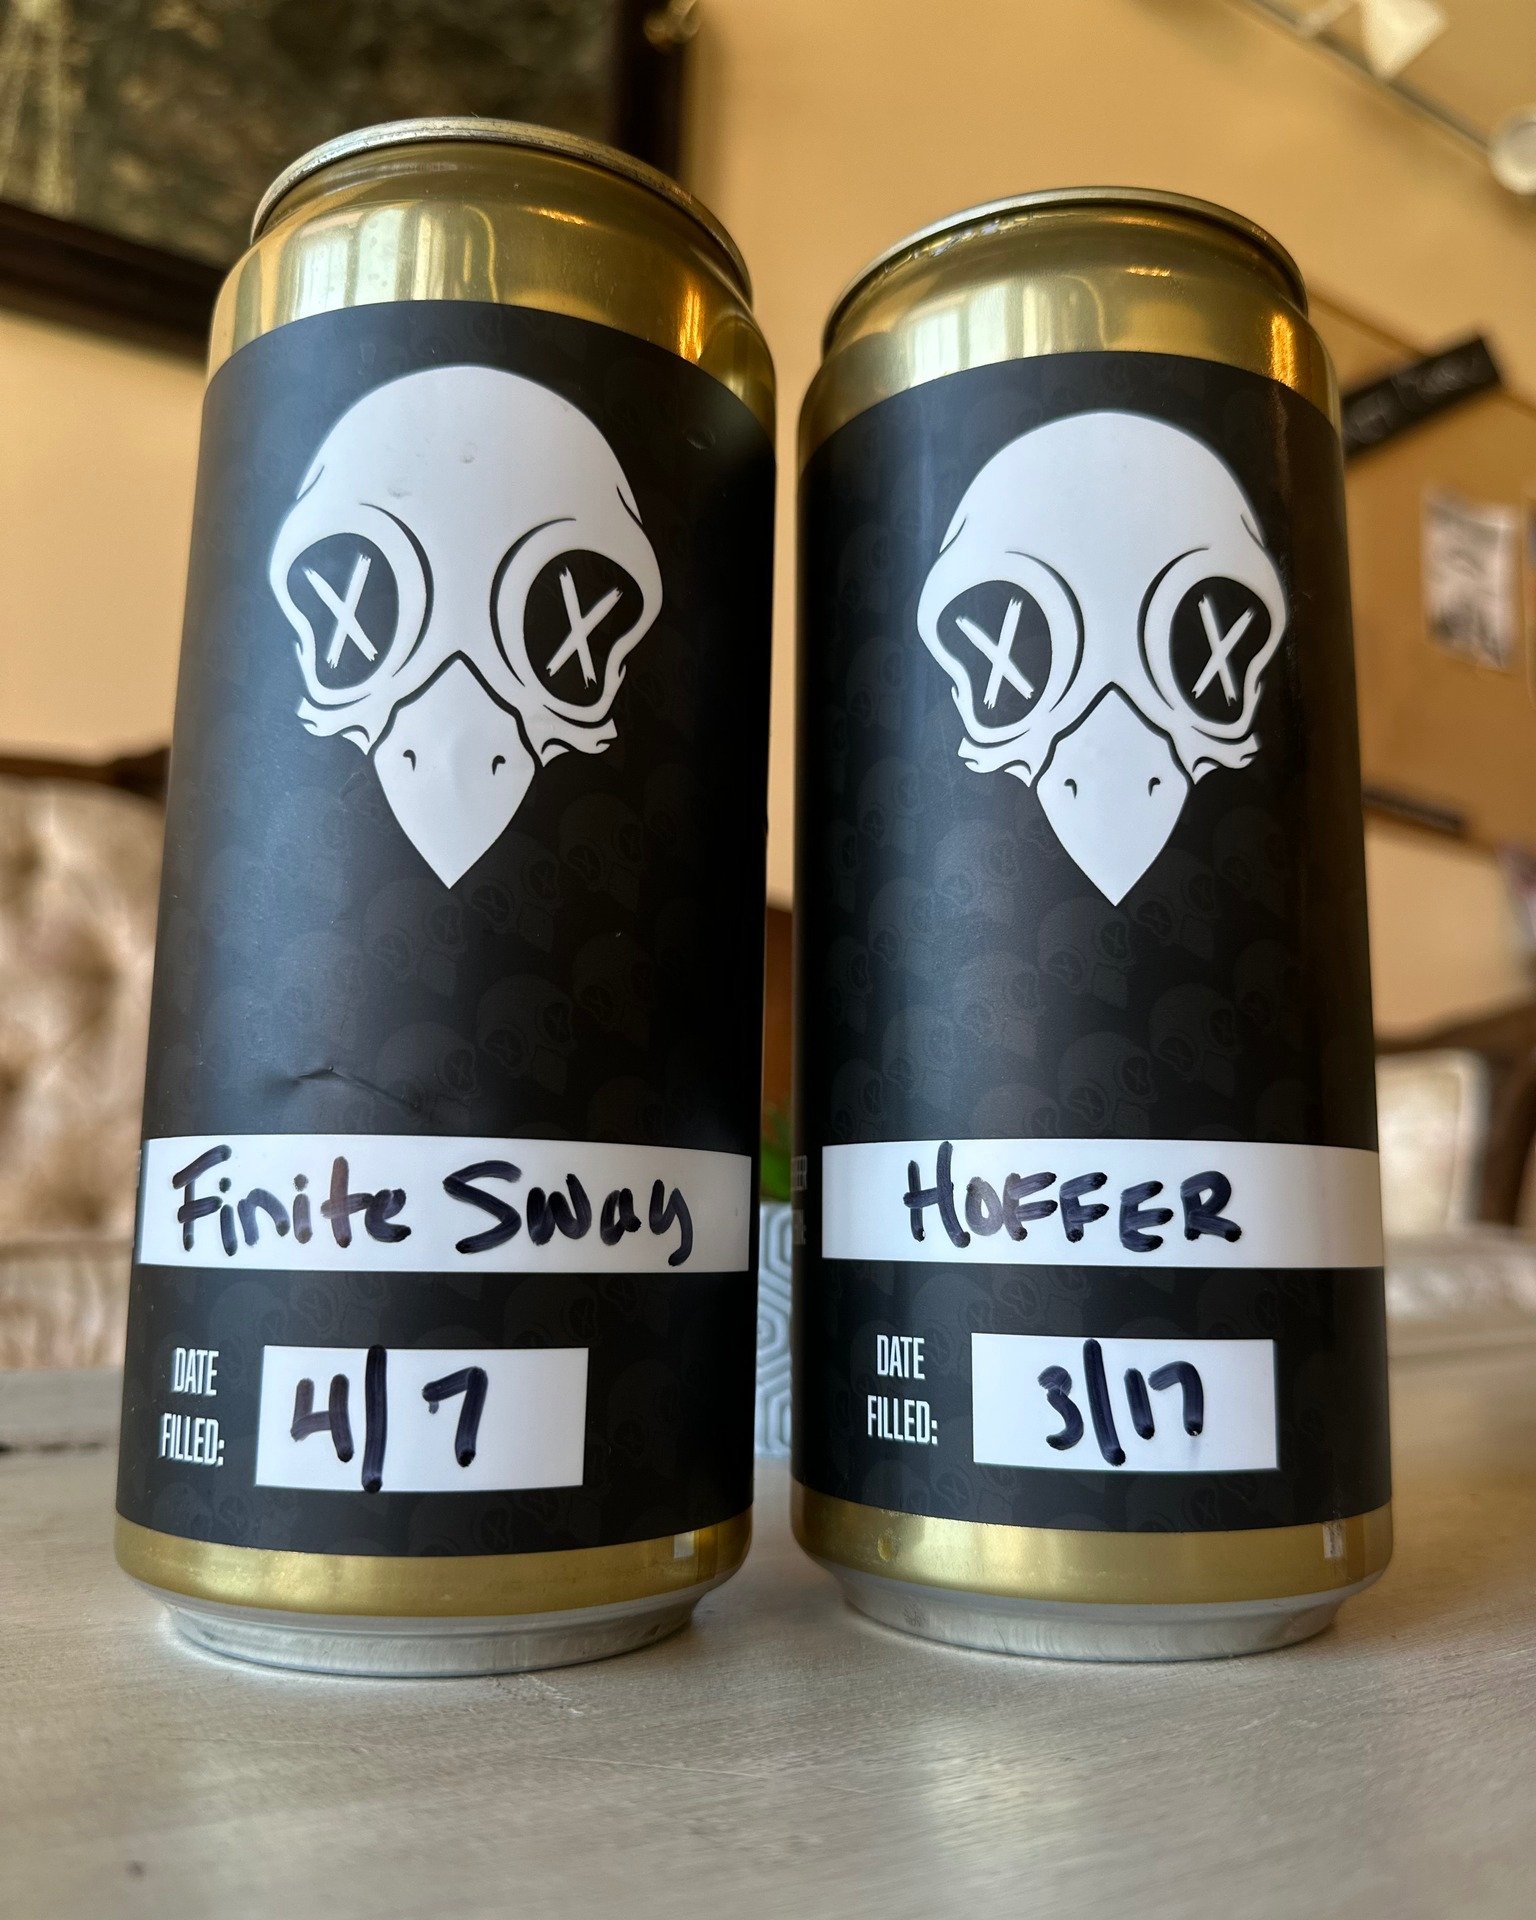 Cans of the week! Now available (in addition to Hoffer our House IPA) is Finite Sway! You may remember this beer as being Hannah's first brew. What better way to say farewell to winter than with a Witbier? See you at 4pm! #craftbeer #nanobrewery #wel